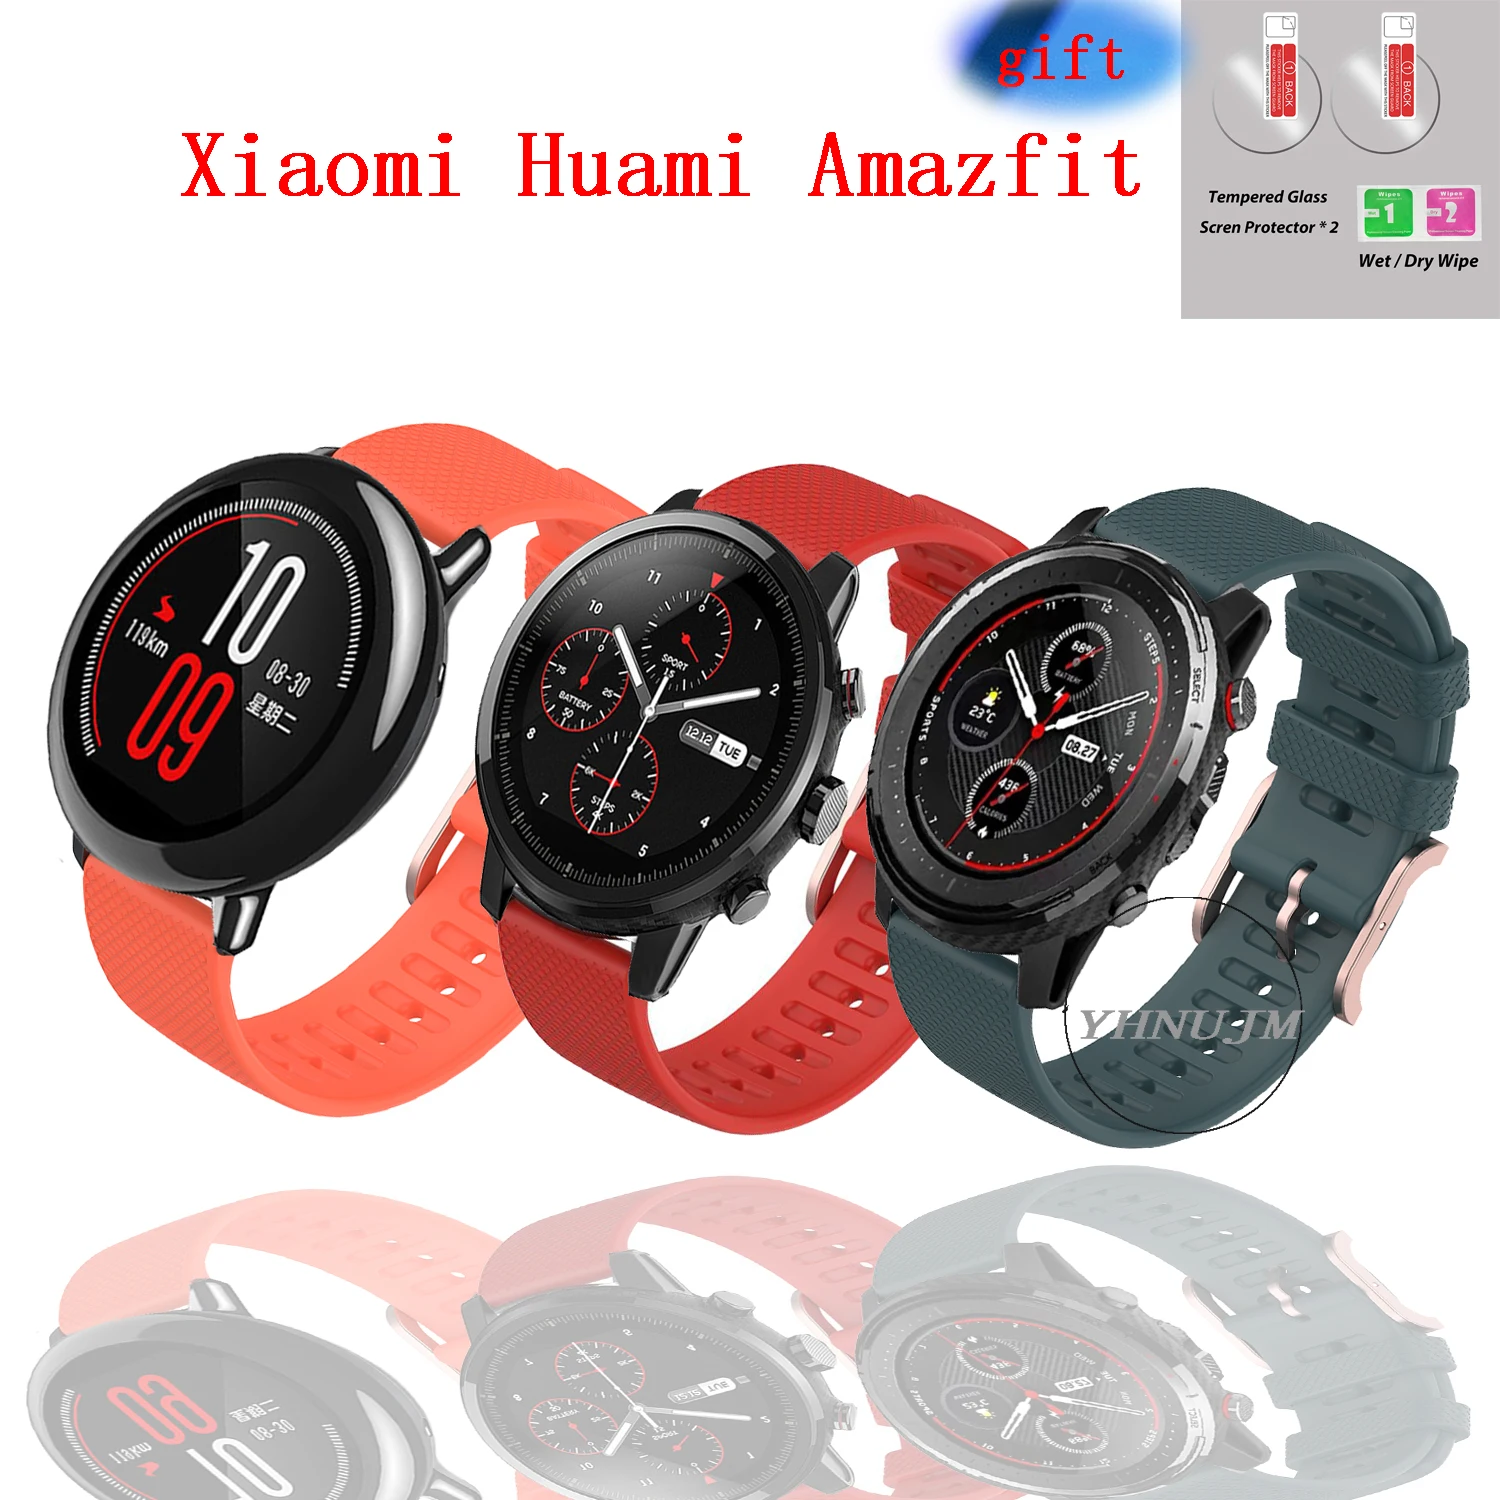 22mm Sports Silicone Wrist Strap bands for Xiaomi Huami Amazfit Bip BIT PACE Lite Youth Smart Watch Replacement Band Smartwatch sport silicone strap for xiaomi huami amazfit bip bit pace lite youth smart watch band for huami amazfit youth bracelet strap